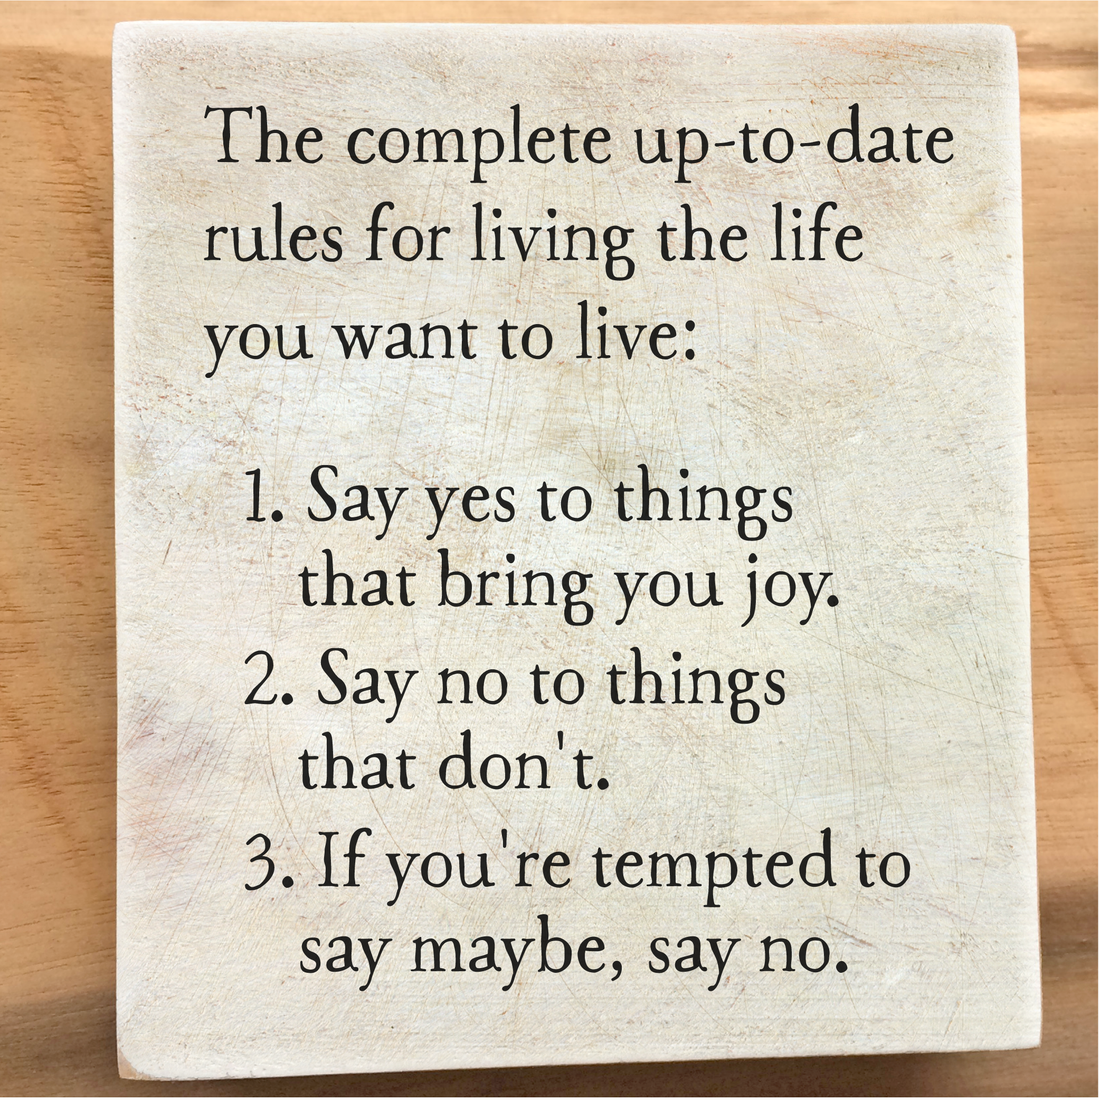 rules for living storyblock